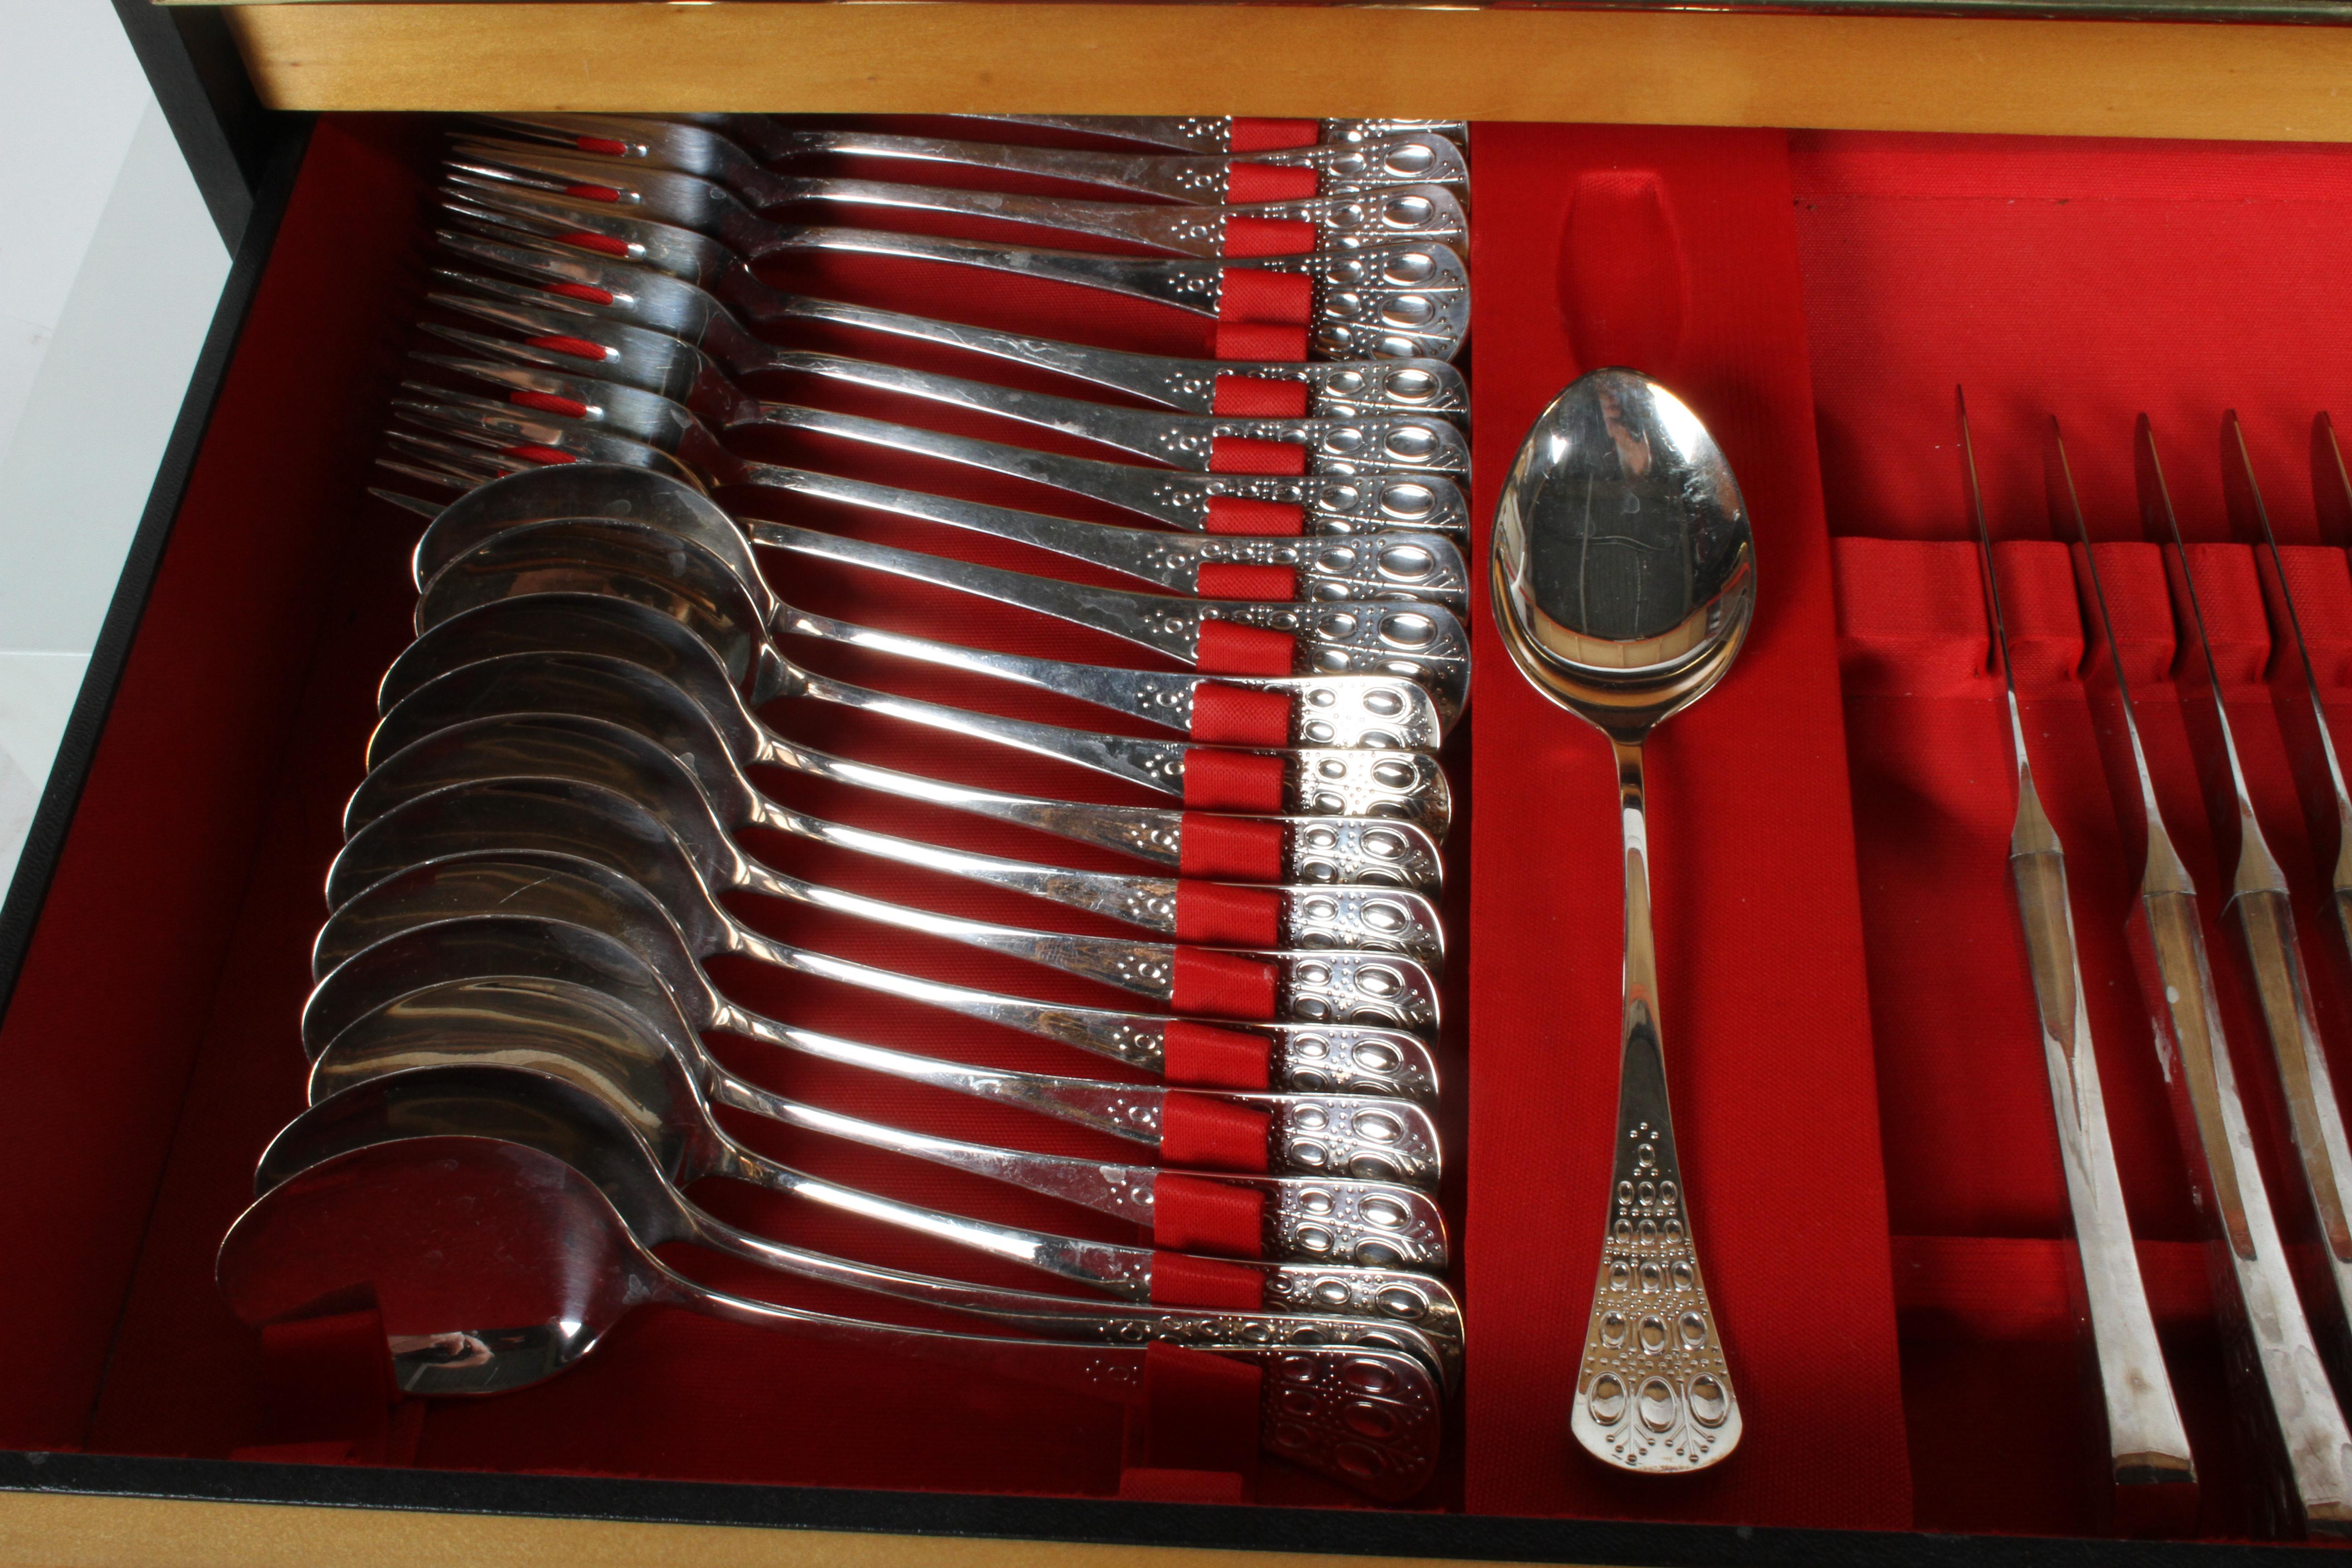 Romance, Bijorn Windblad Rosenthal Silverplate Flatware for 12 with Case 79 Pcs For Sale 11